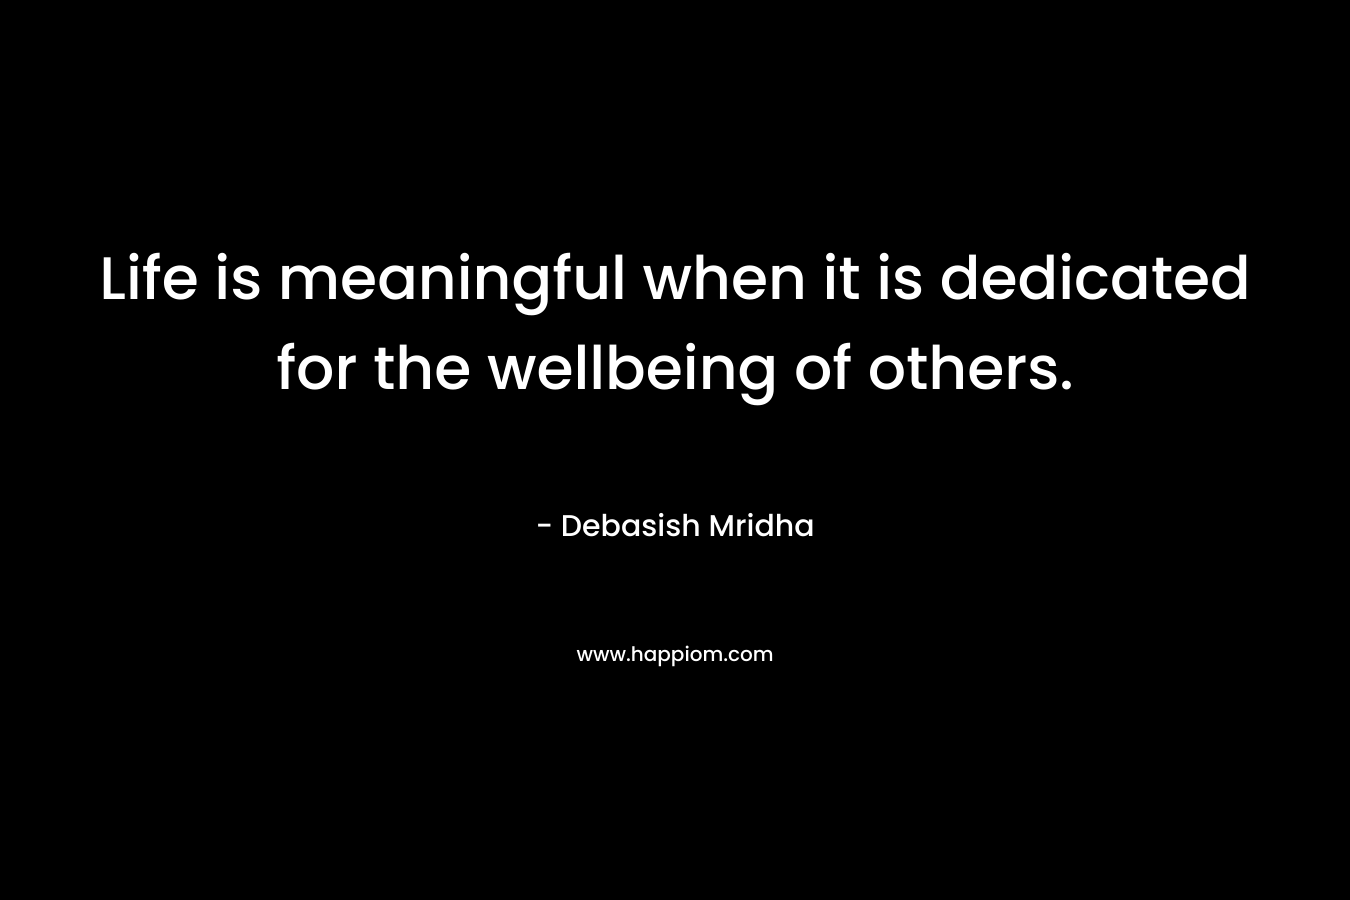 Life is meaningful when it is dedicated for the wellbeing of others.